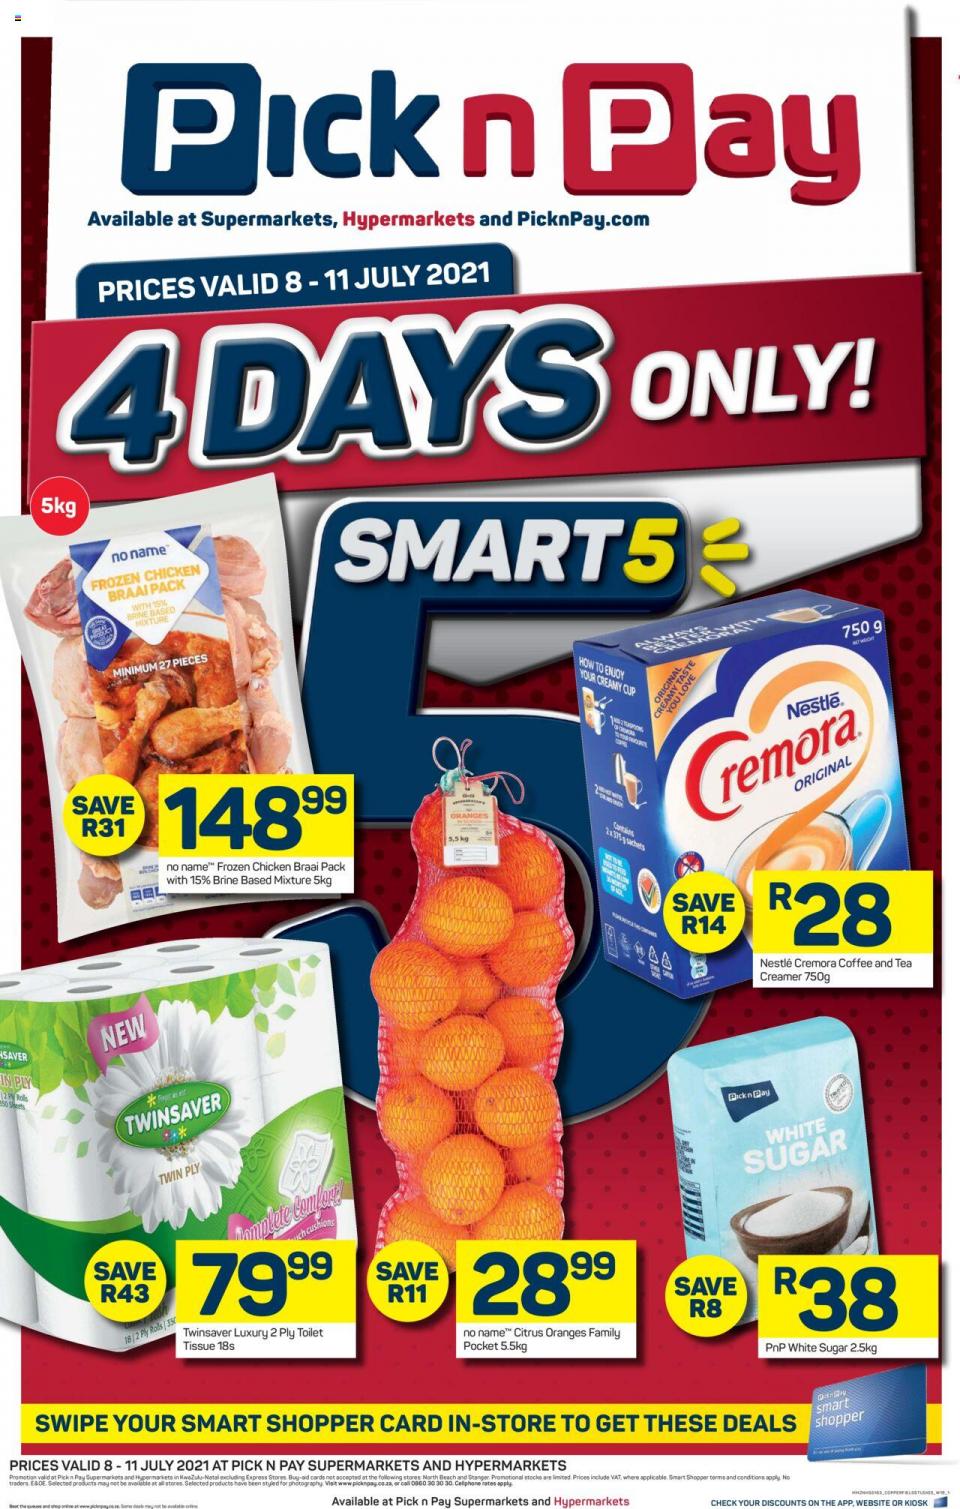 Pick n Pay Specials Weeked Deals 8 – 11 July 2021